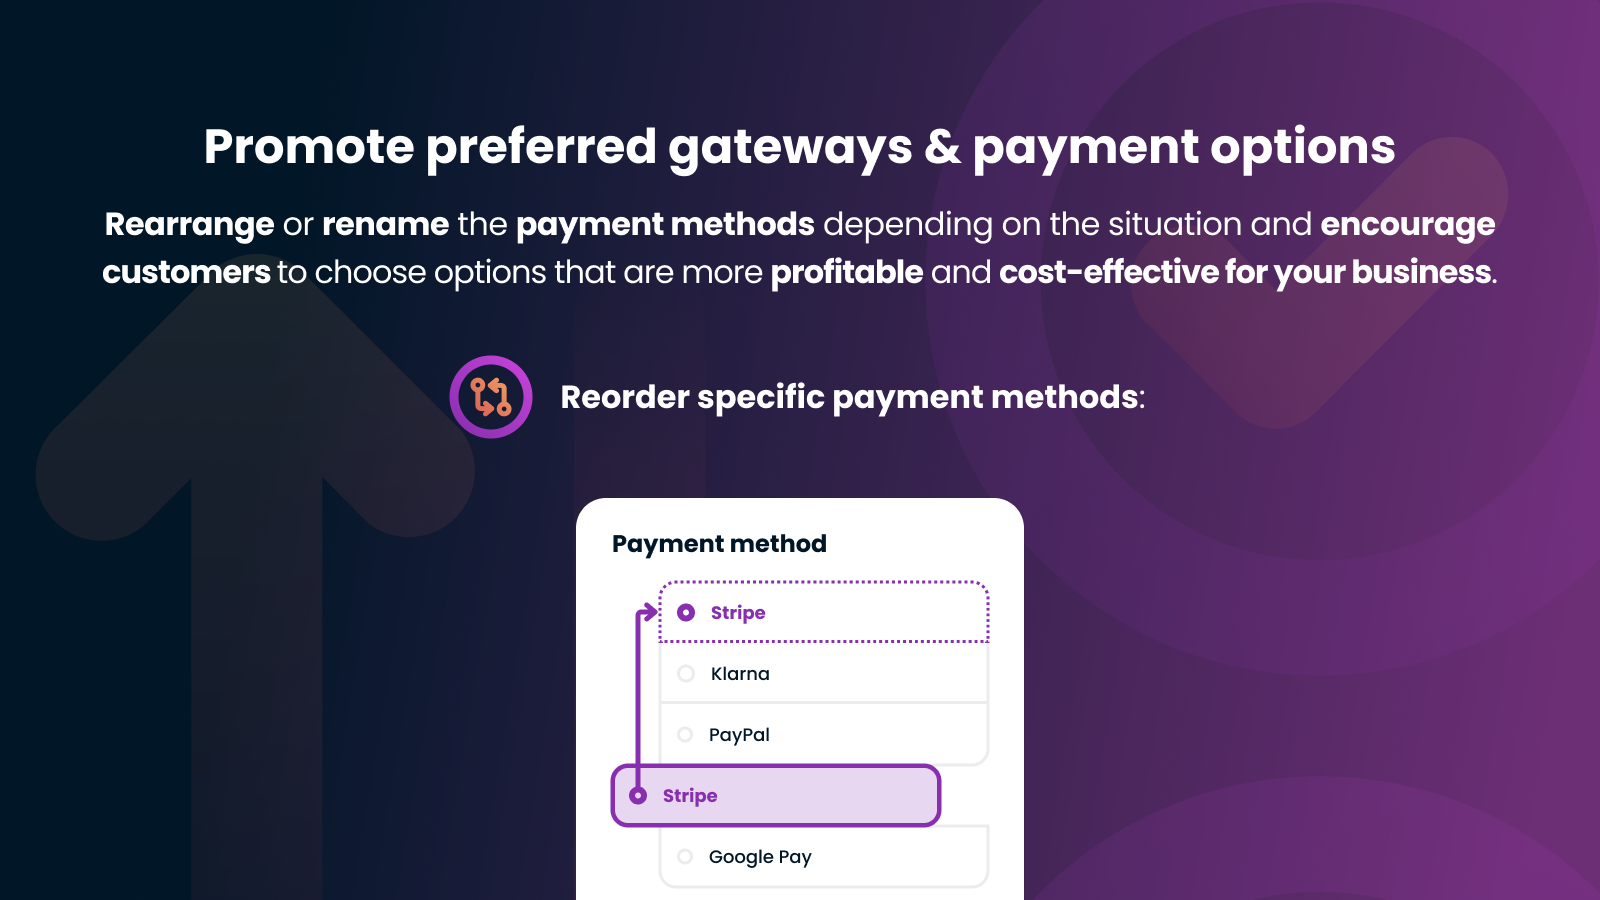 Reorder payment methods in Shopify store depending on situation